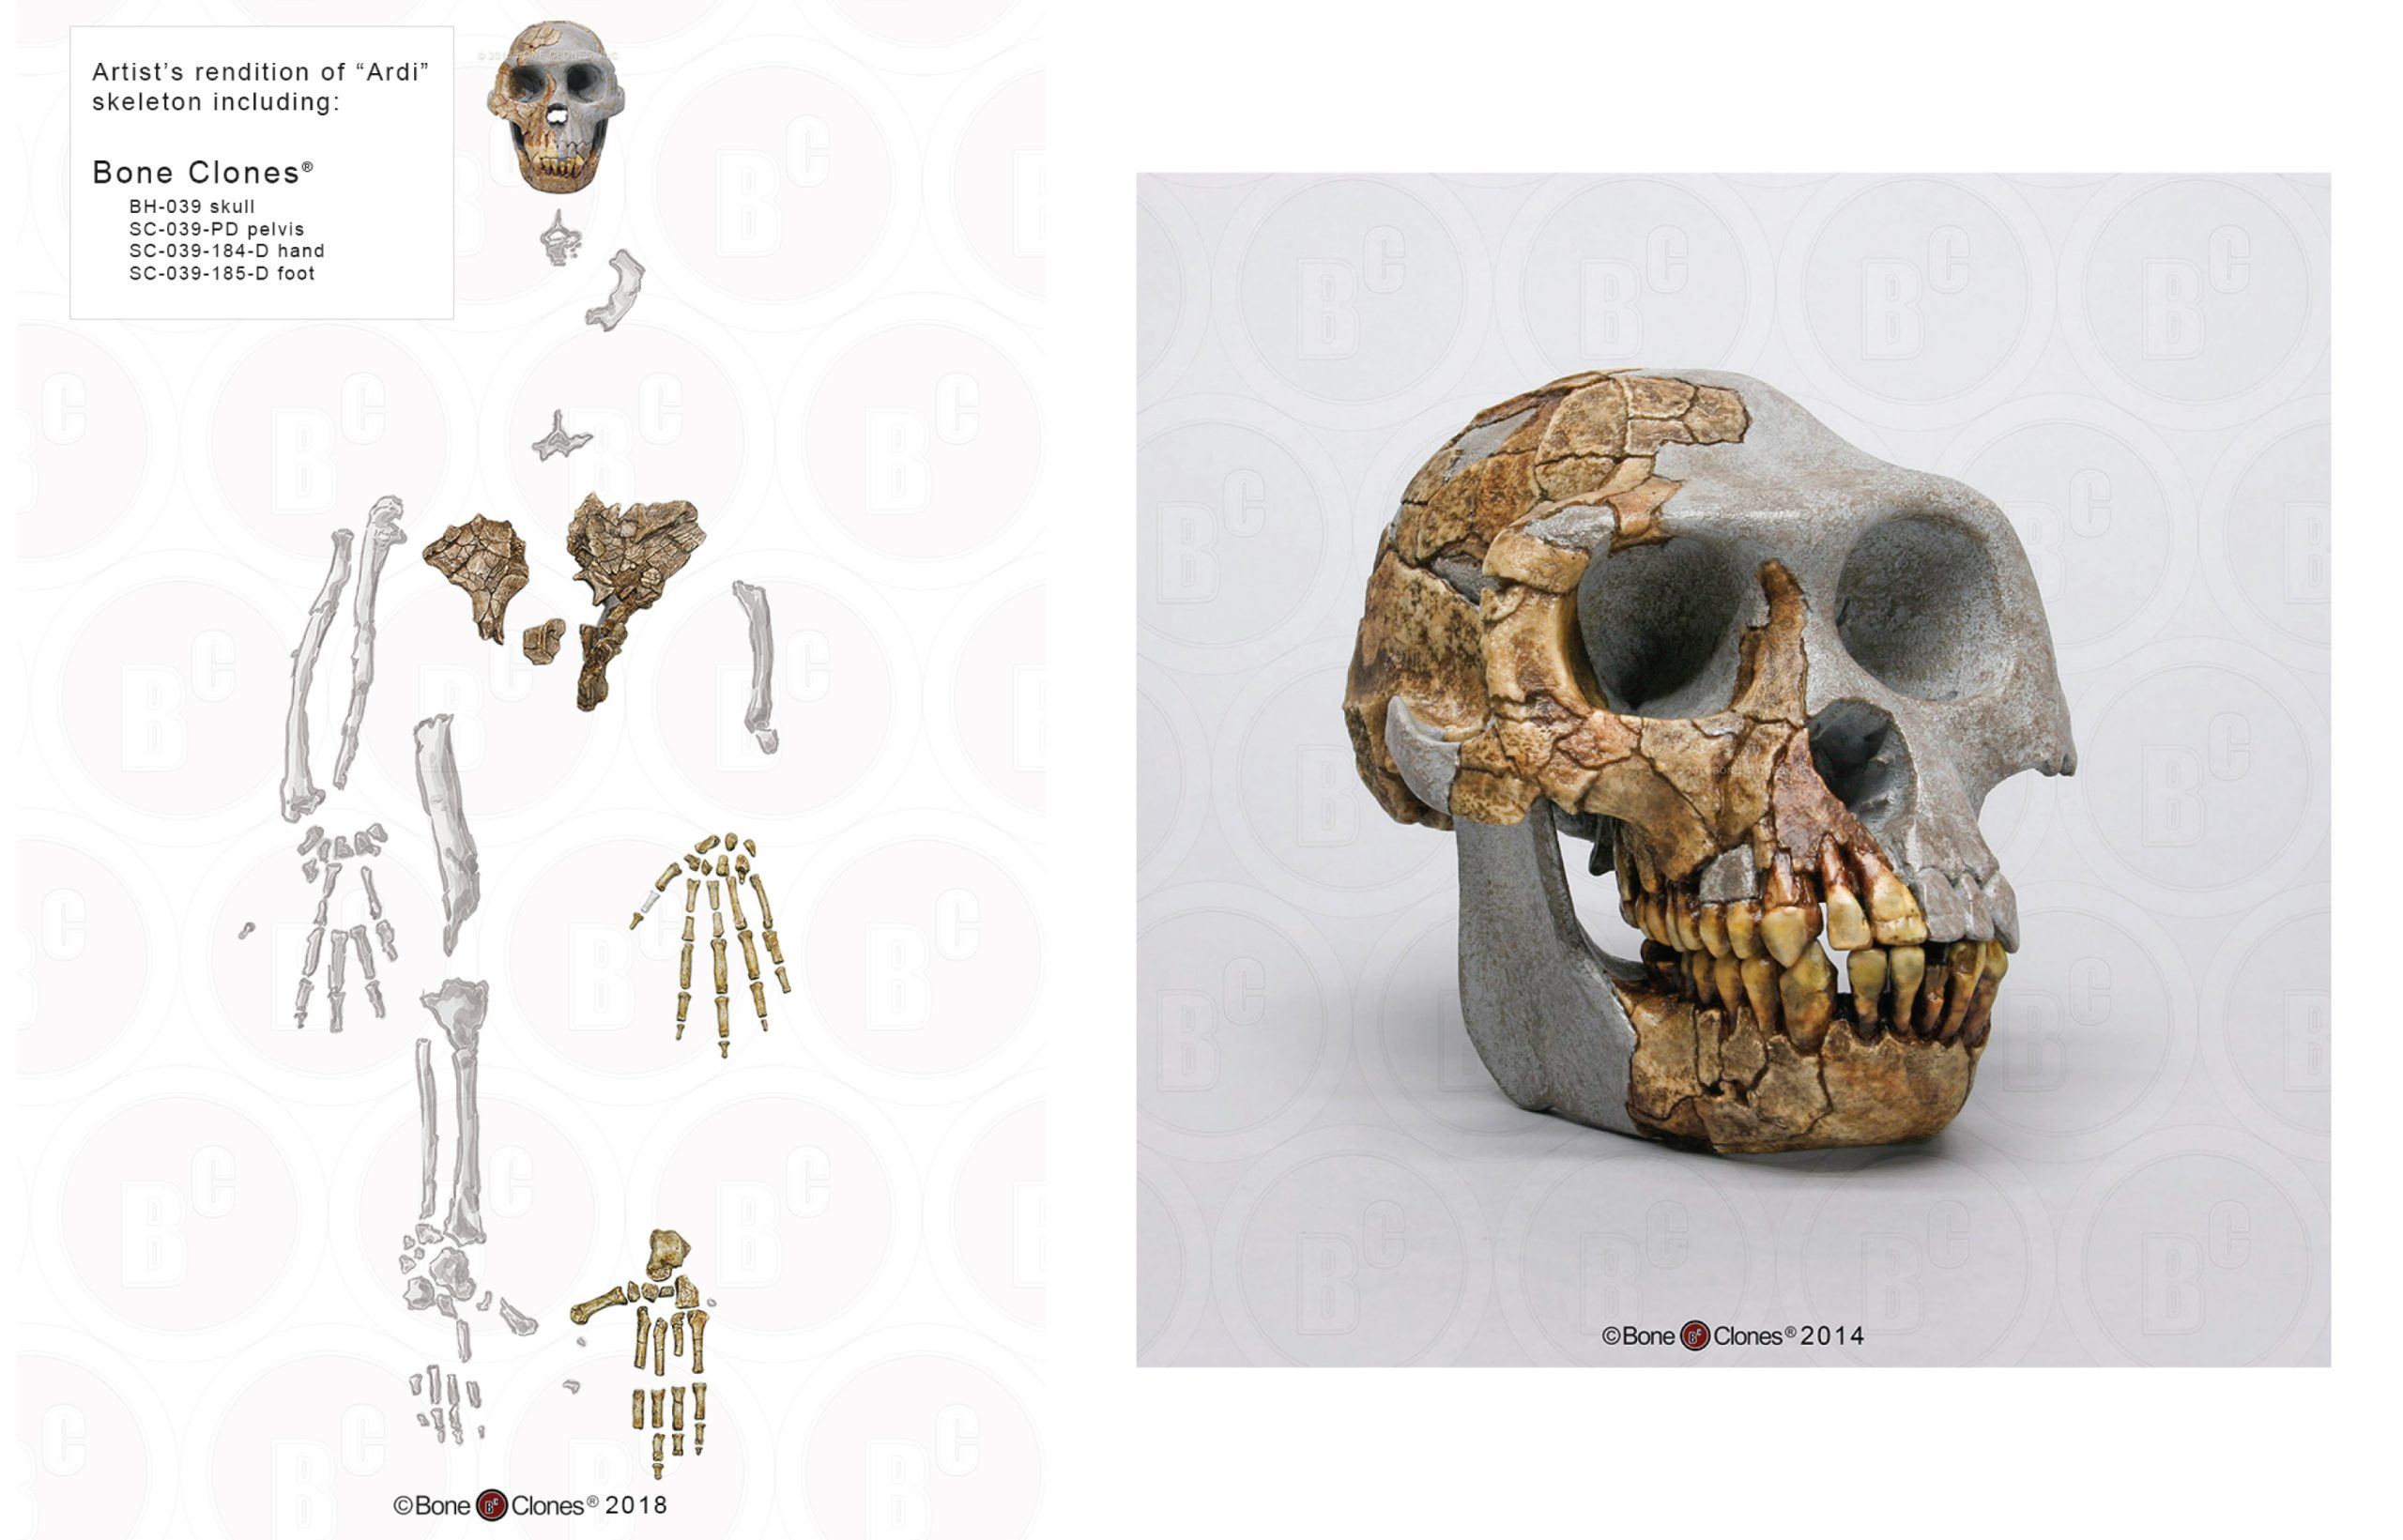 Skull cast and partial skeleton with photographs of some bones and line drawings of others.